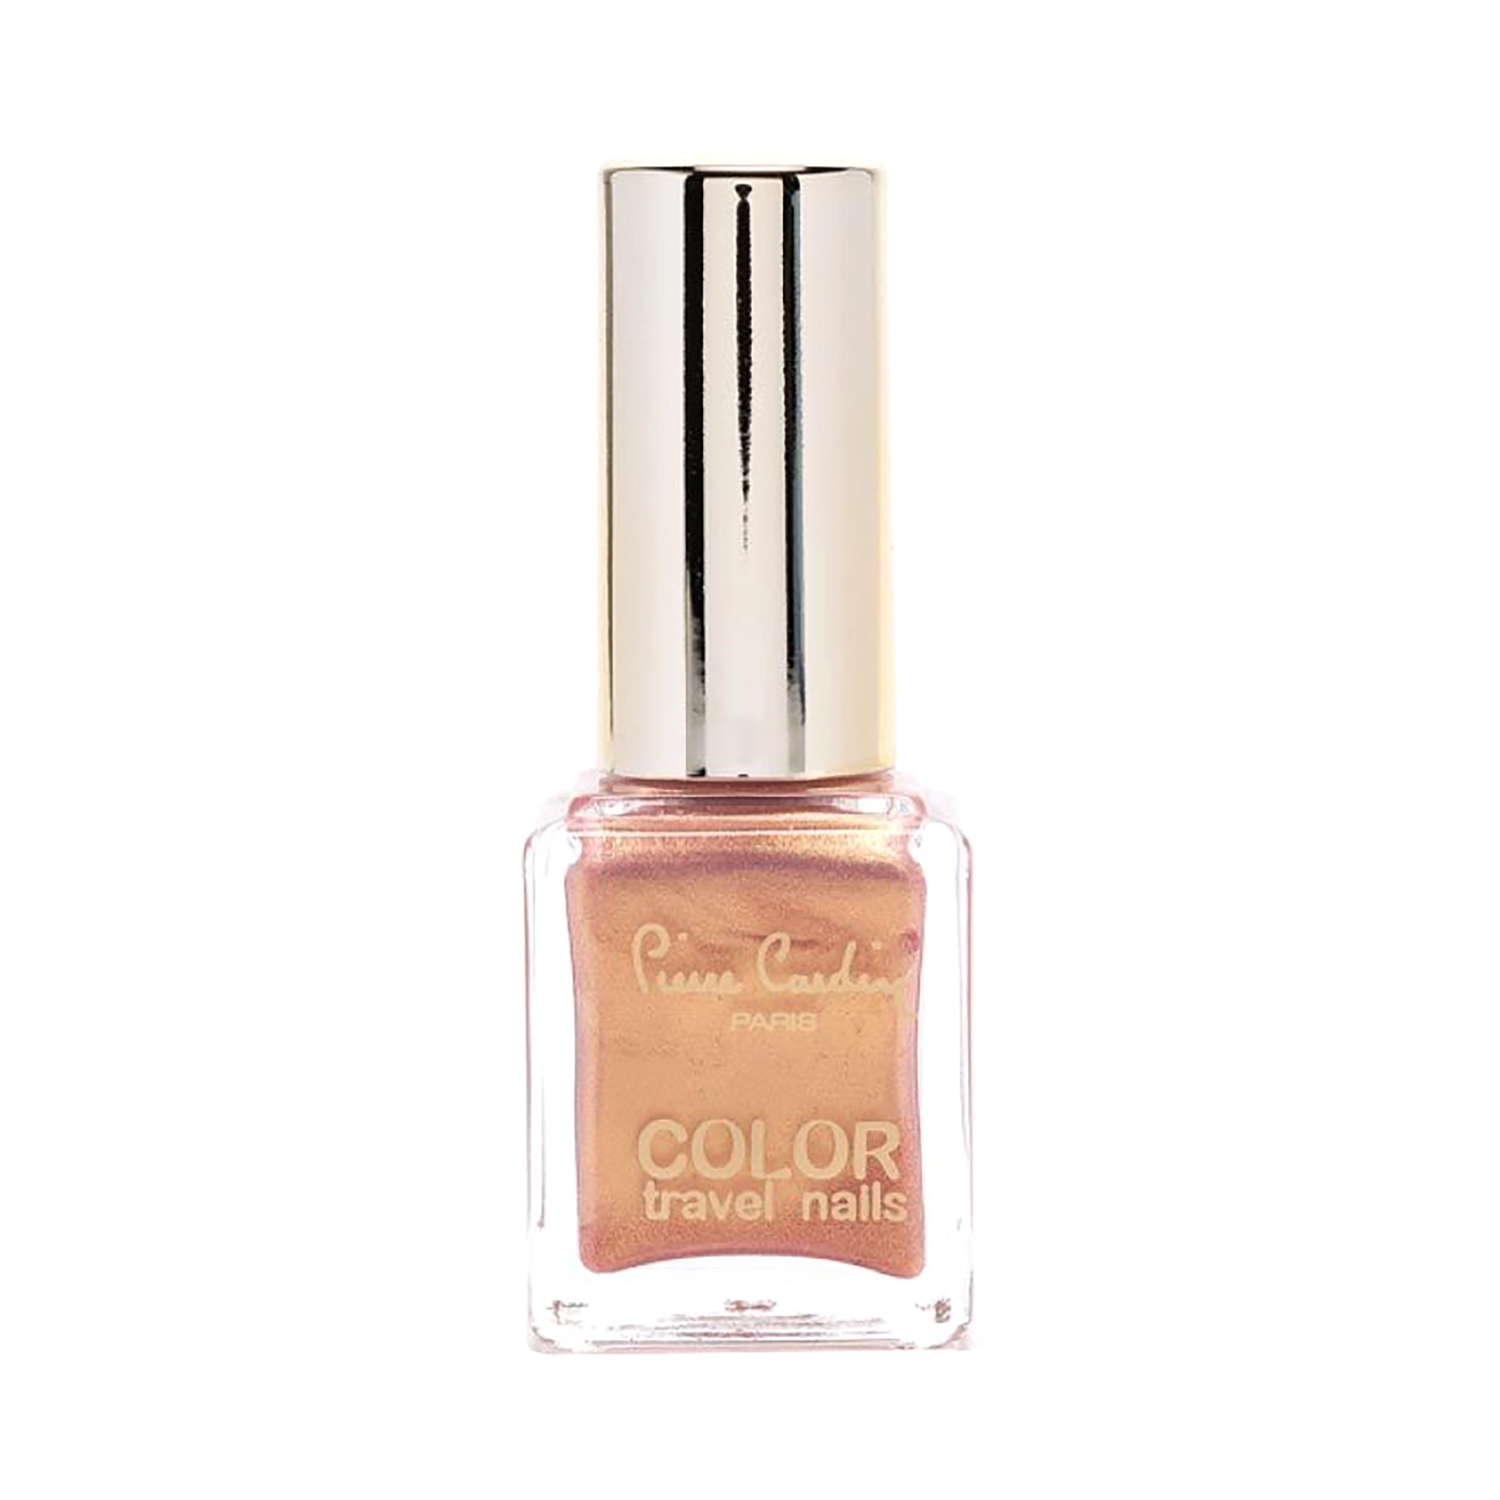 Pierre Cardin Paris | Pierre Cardin Paris Color Travel Nails - 102-Pearly Pink To Yellow (11.5ml)